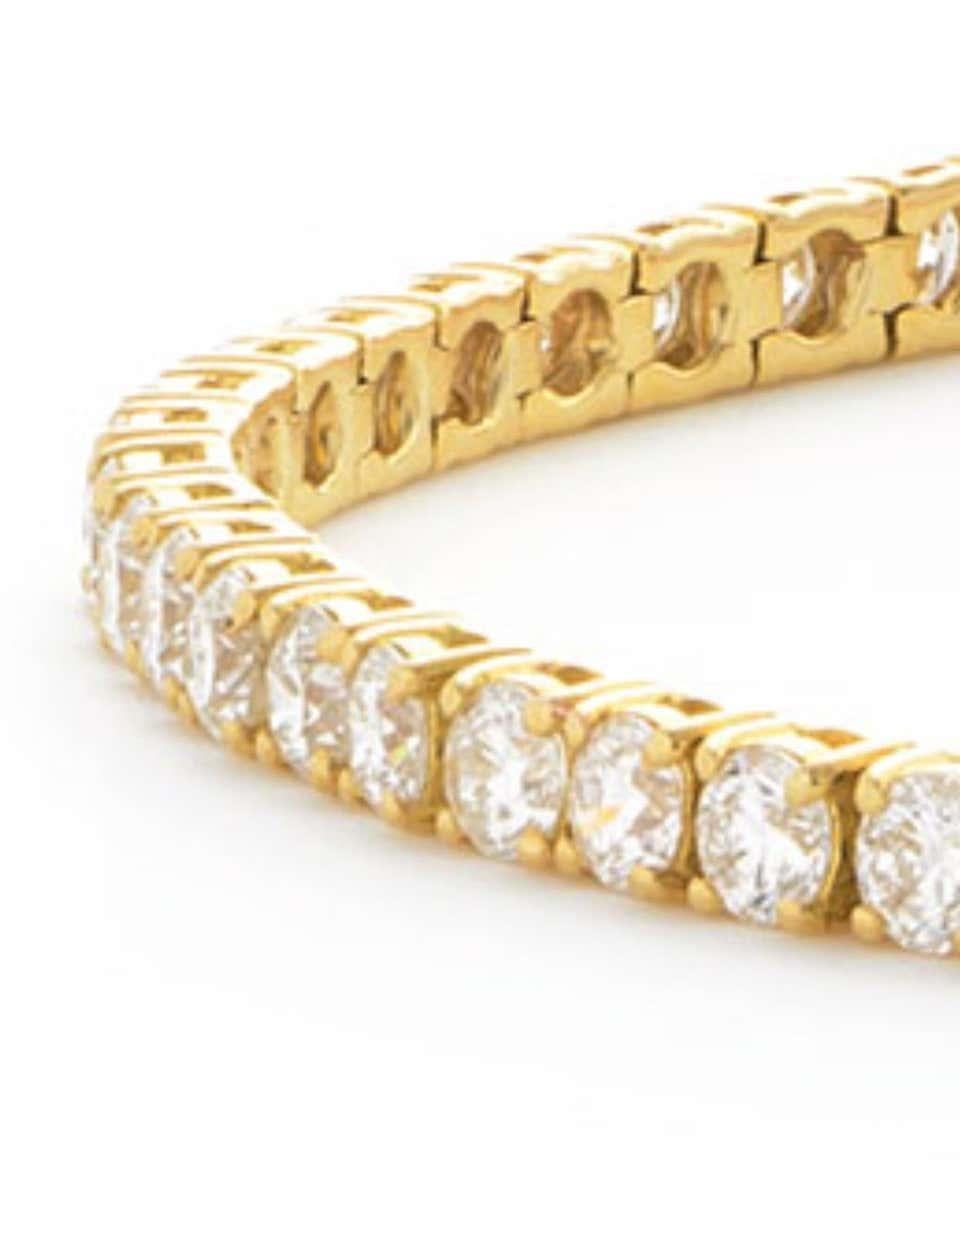 A classic piece that stands the test of time, enjoy the ultimate in luxury and beauty with this gorgeous diamond tennis bracelet, featuring 1.50 Carat of dazzling White Color G Clarity SI1 Round Brilliant Cut diamonds beautifully held in a classic 4